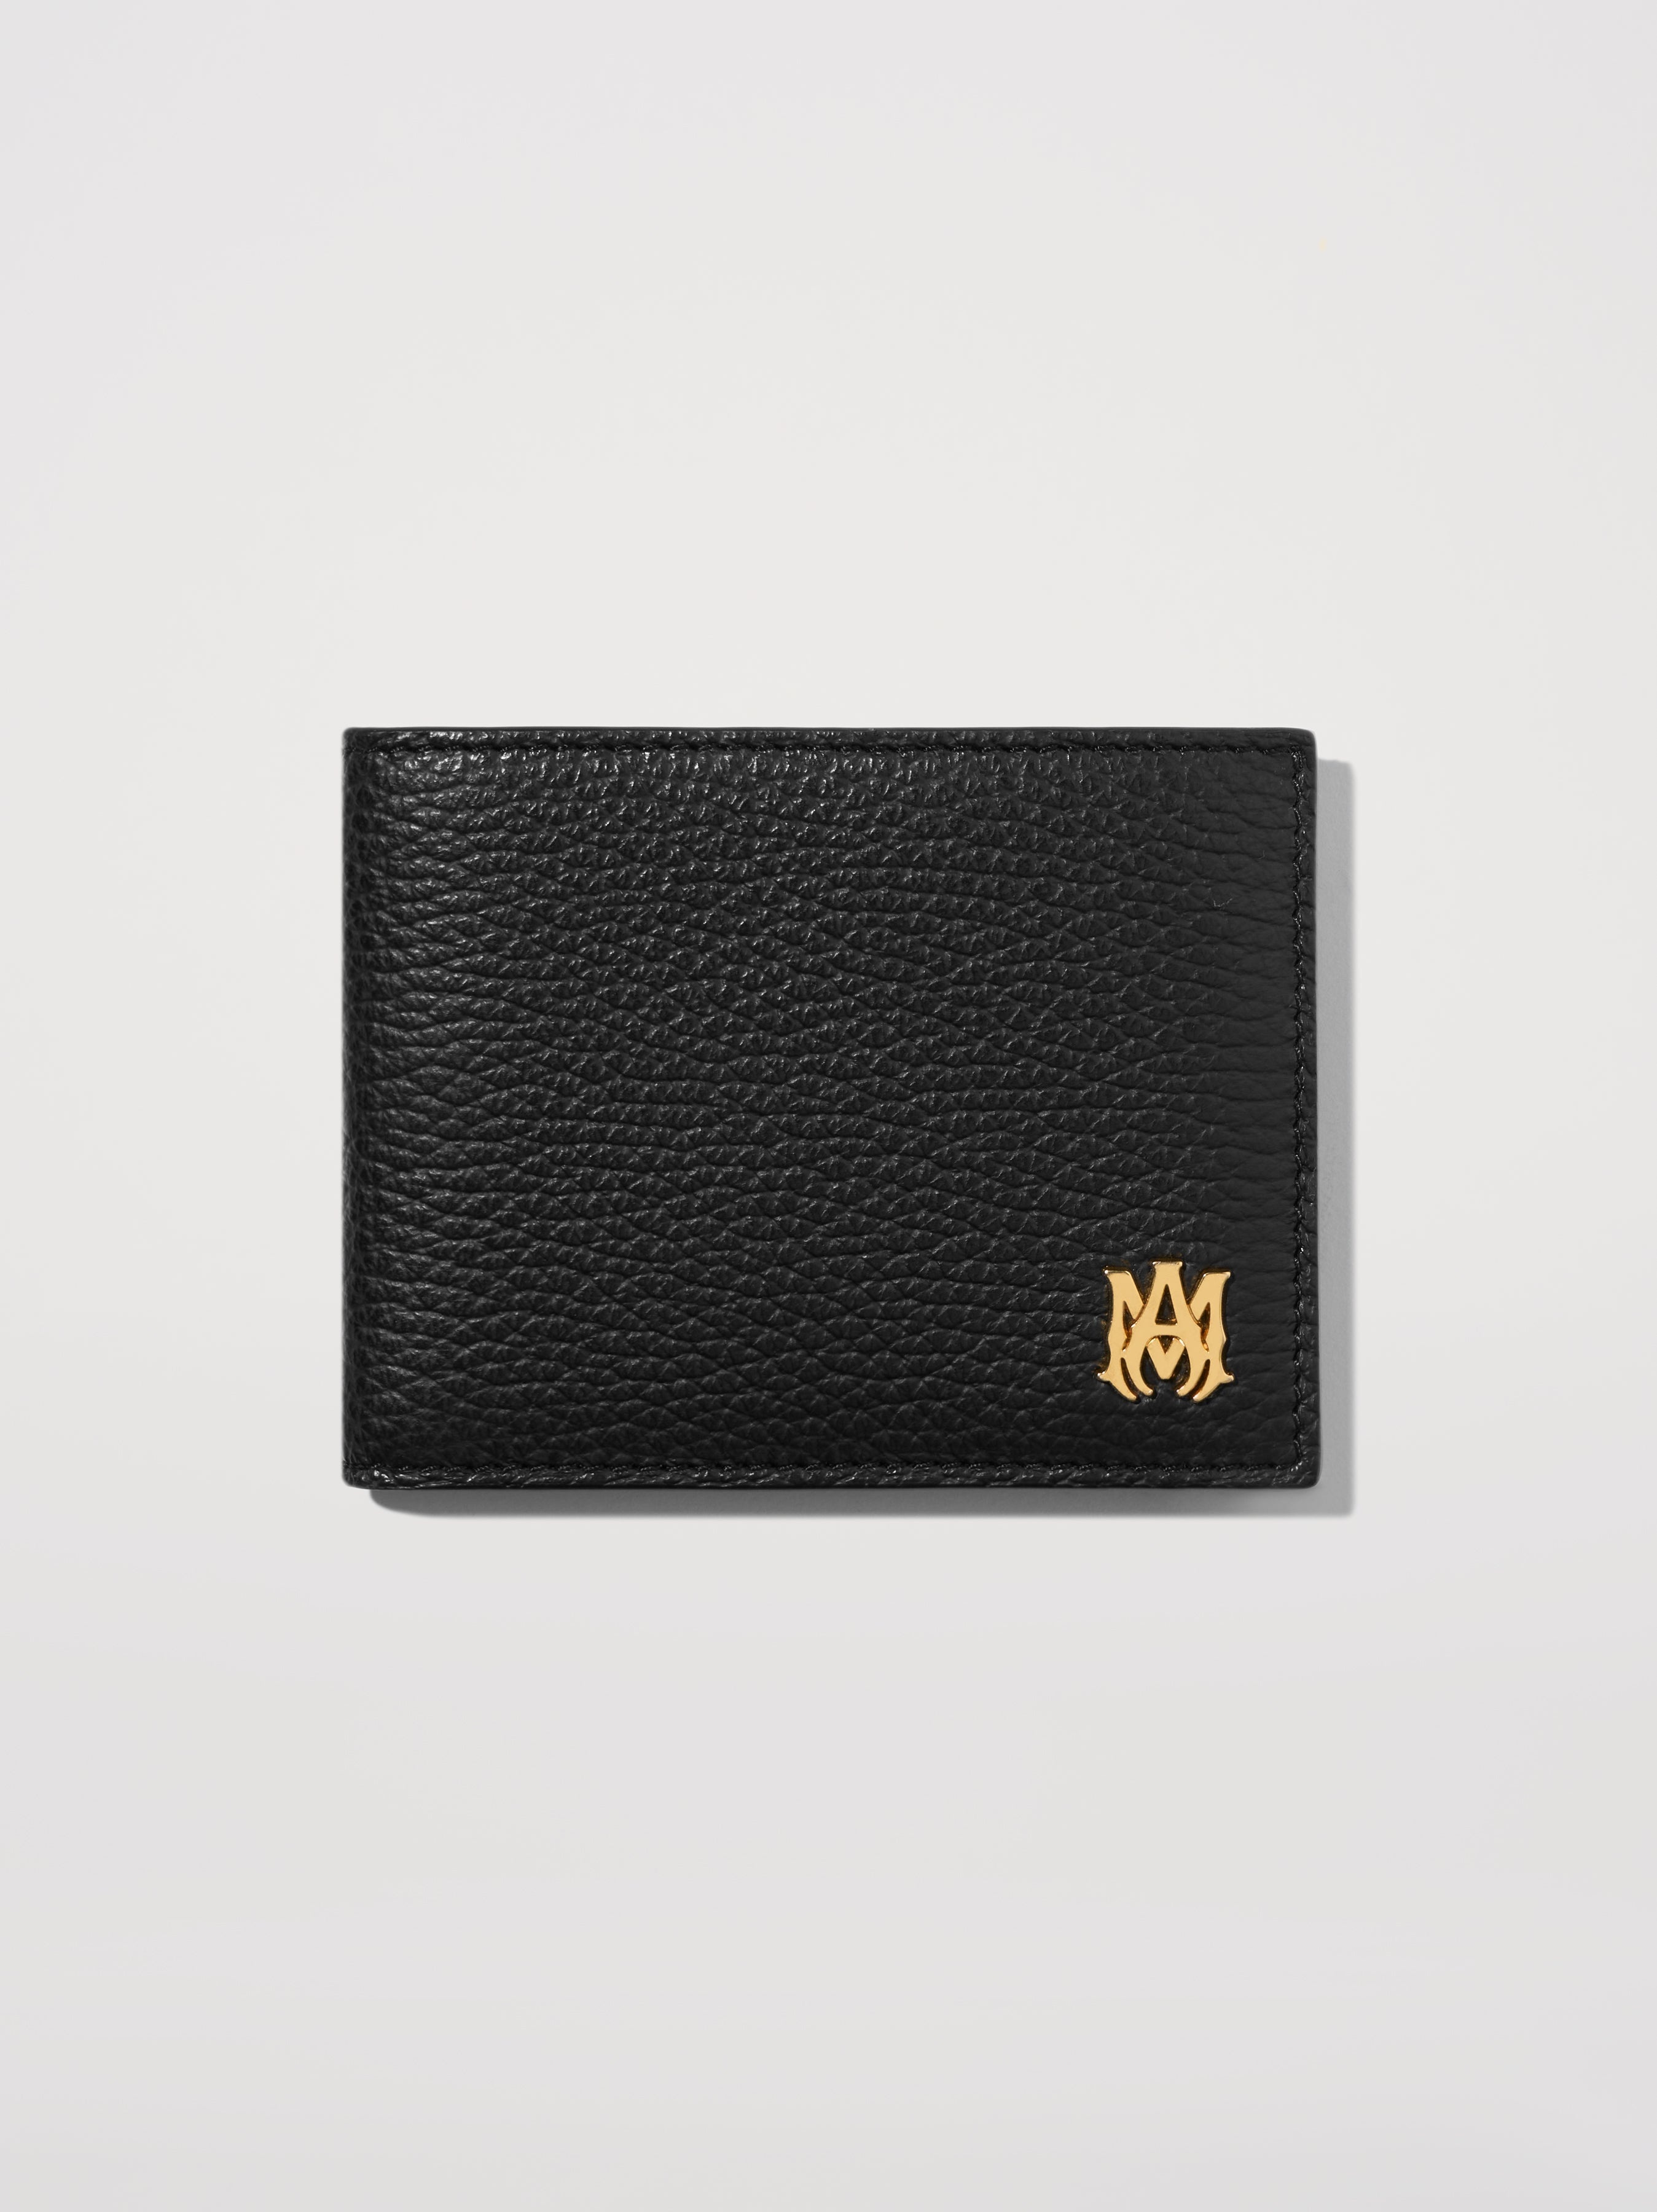 M.A. CLASSIC BIFOLD WALLET - 1